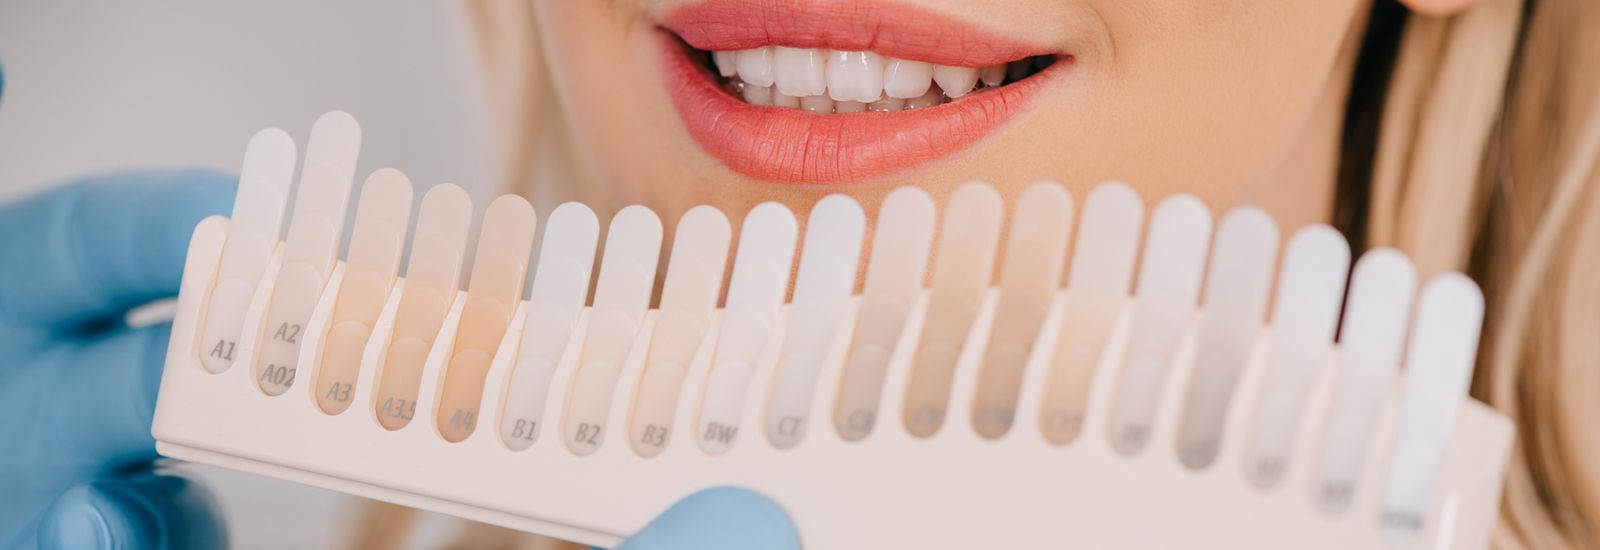 Teeth whitening color chart